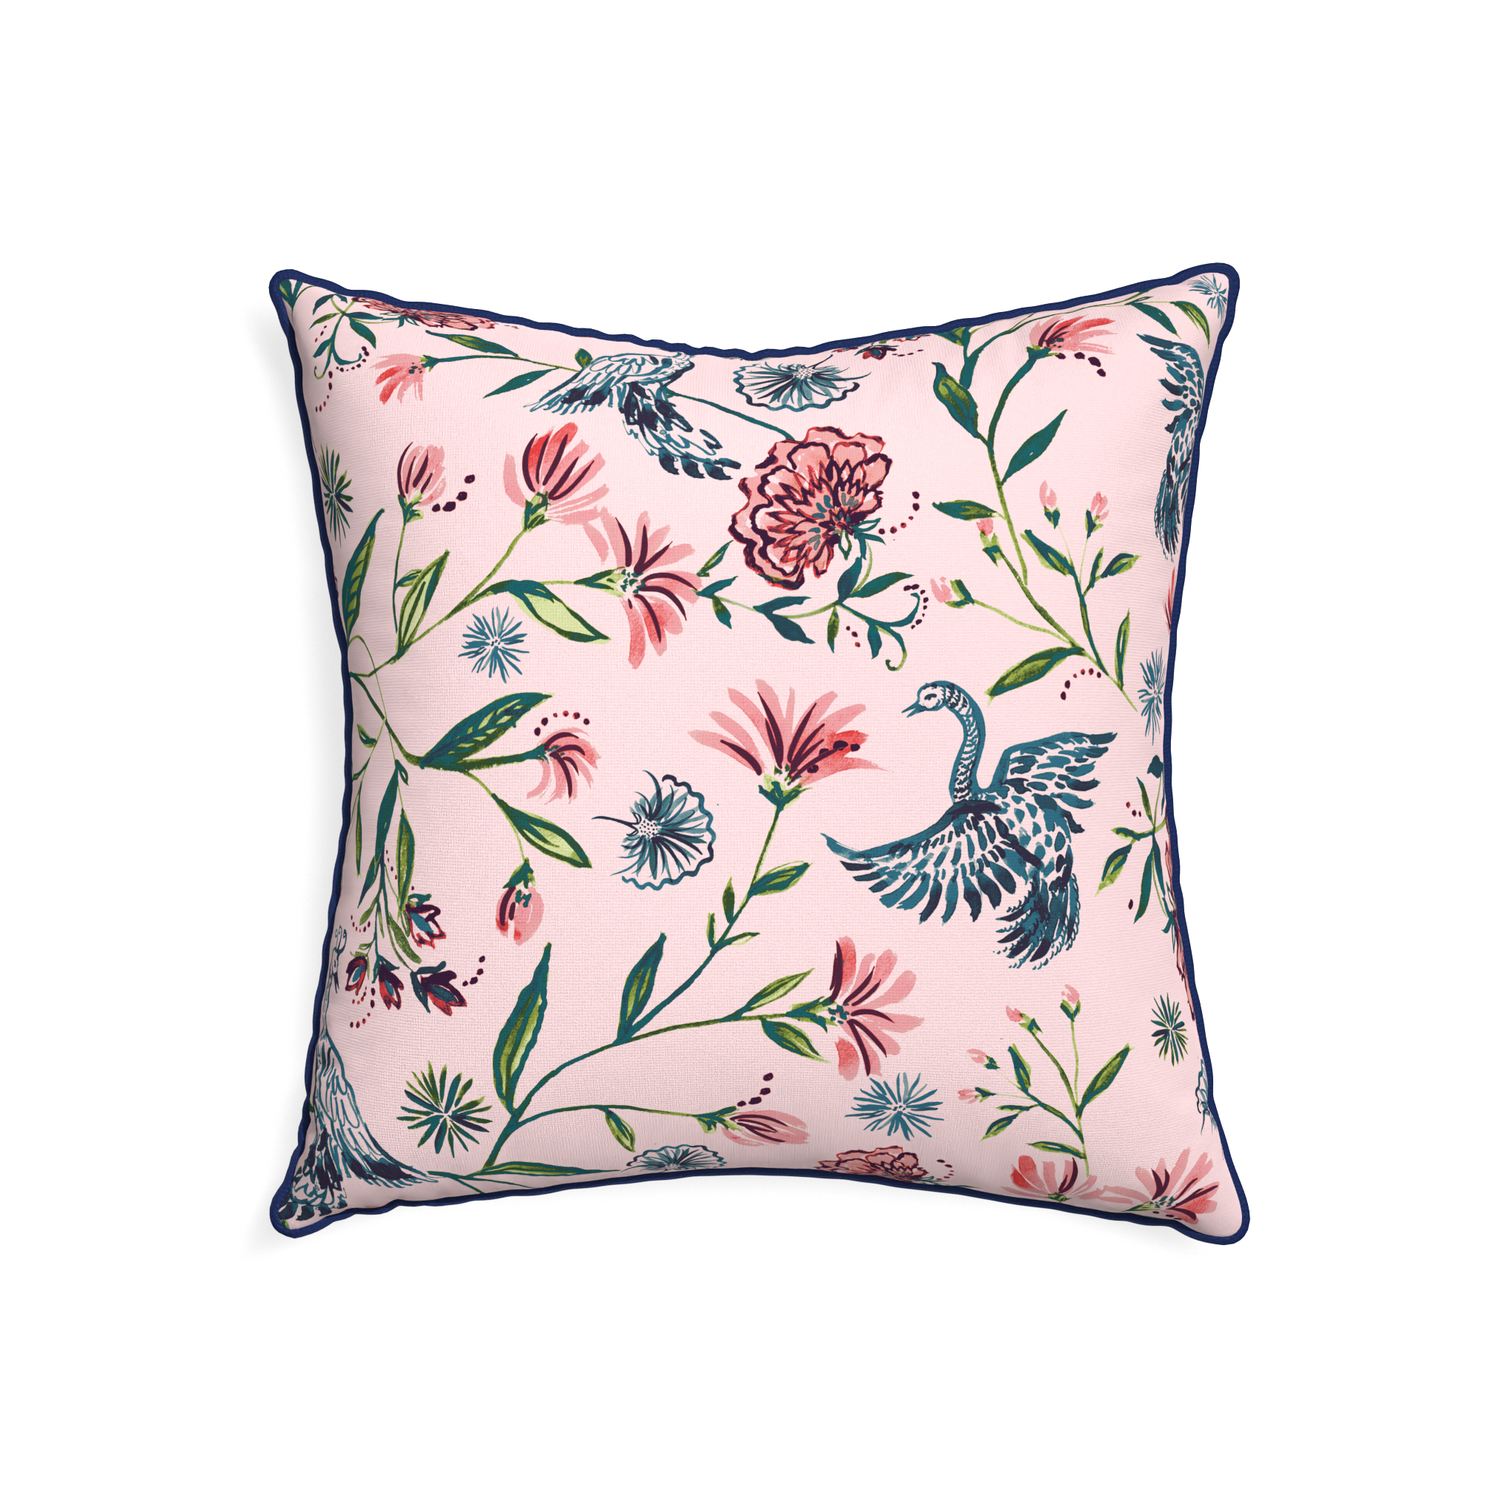 22-square daphne rose custom pillow with midnight piping on white background